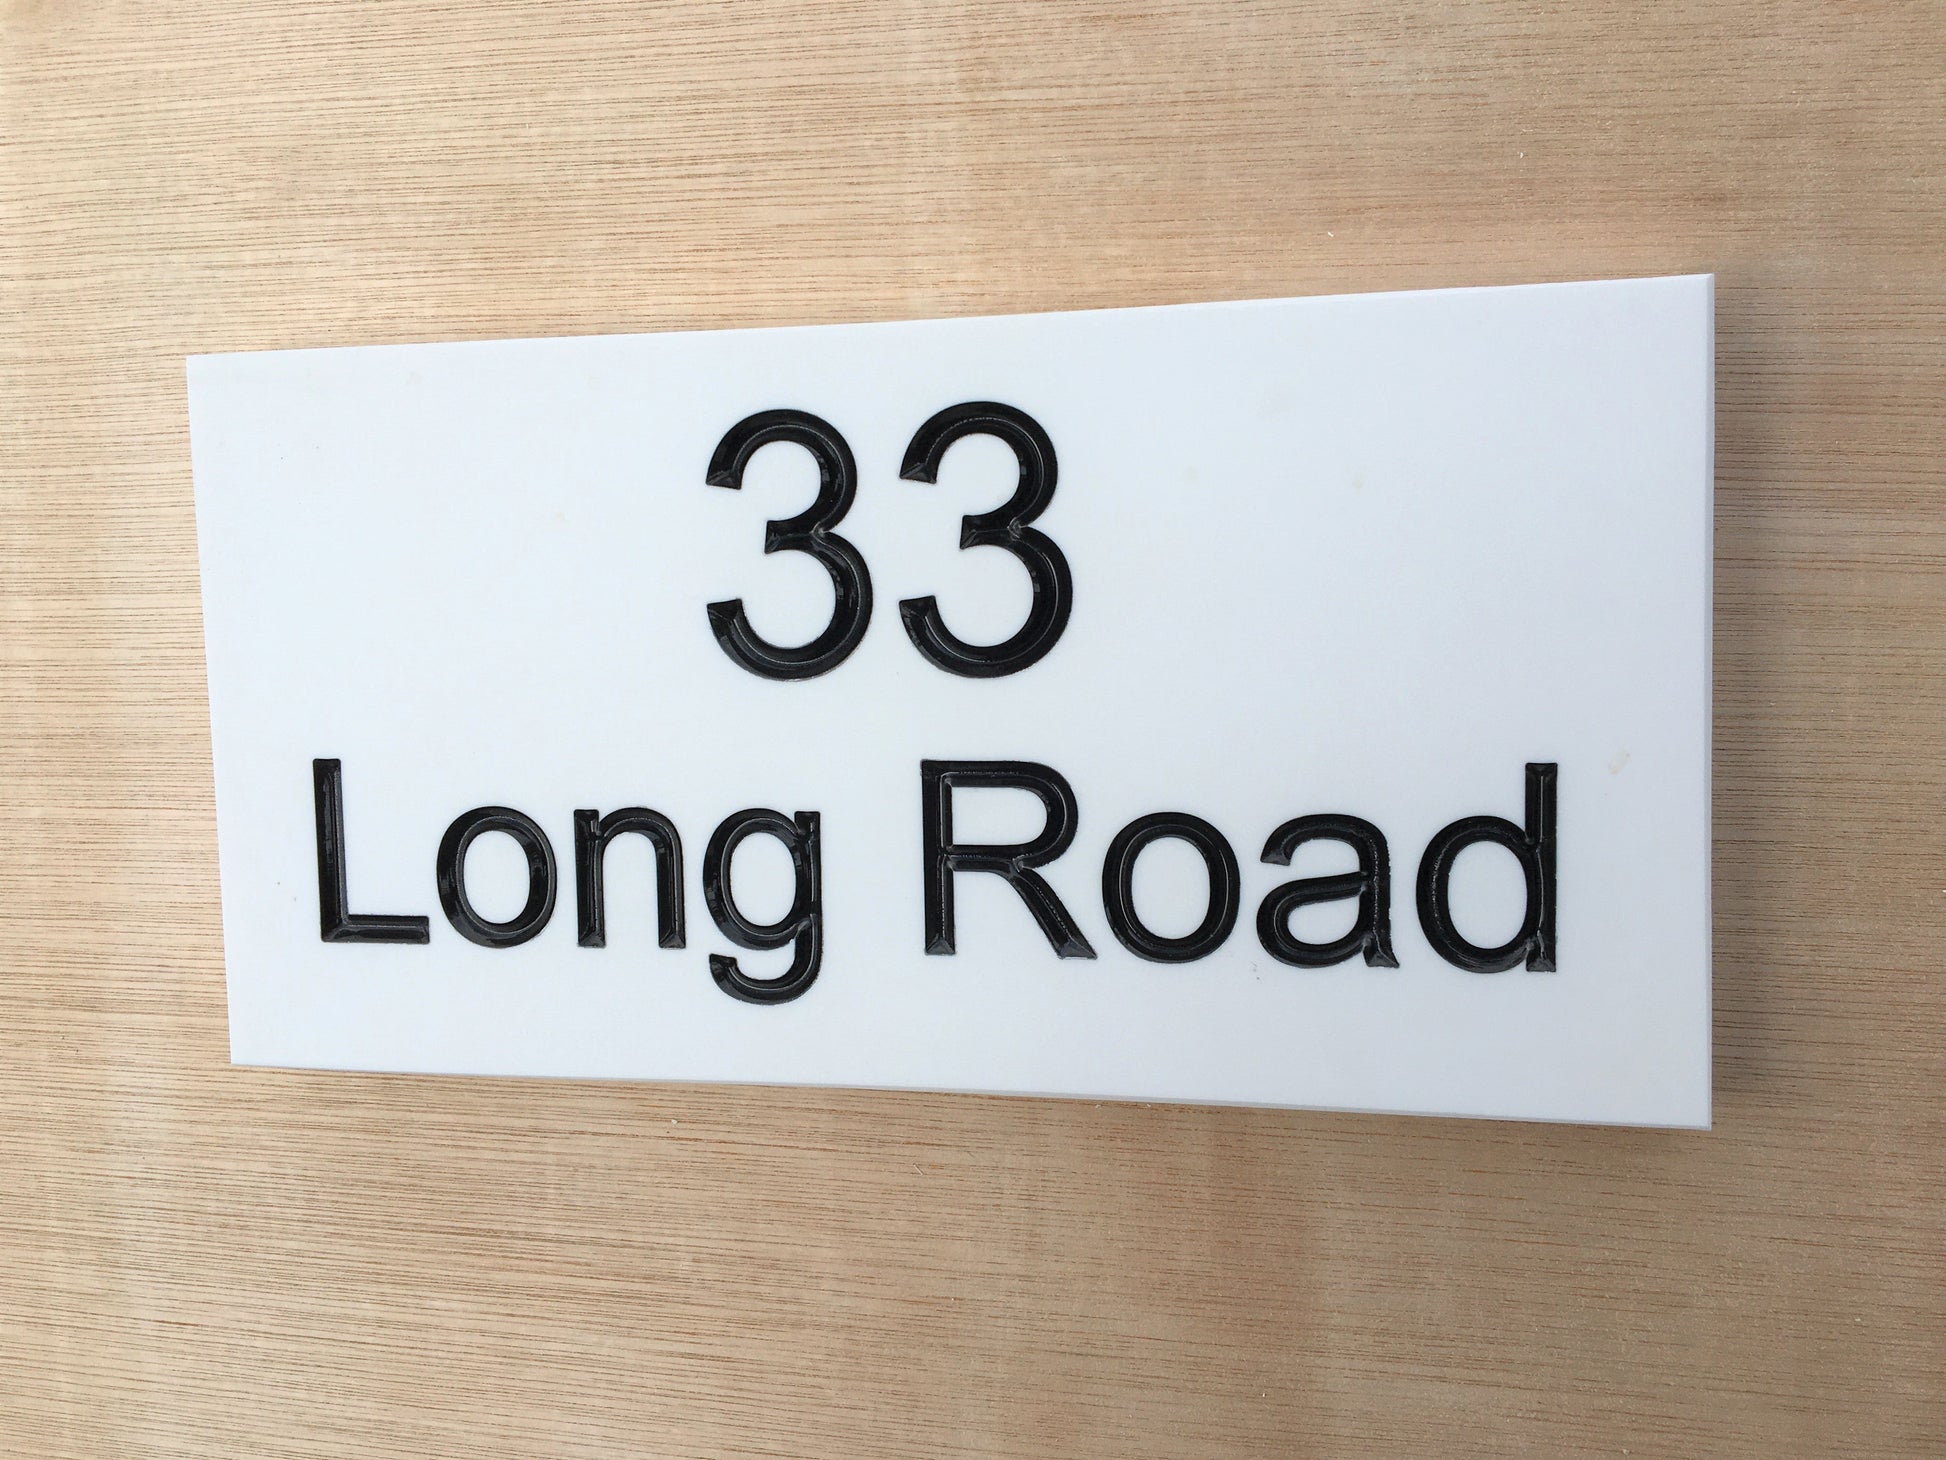 House sign measuring 200mm x 100mm using white Corian with the address and number 33 deep engraved and infilled with black monument paint